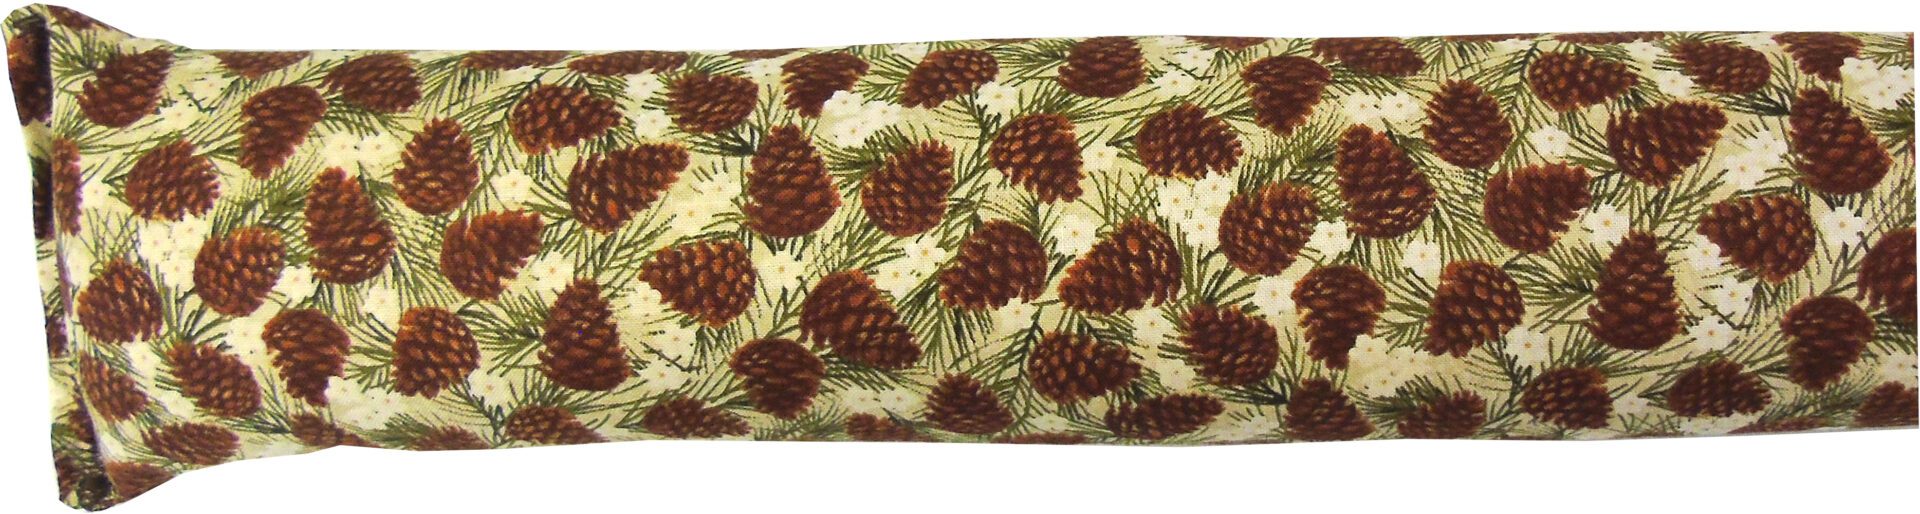 A beige pillow with pine cones print